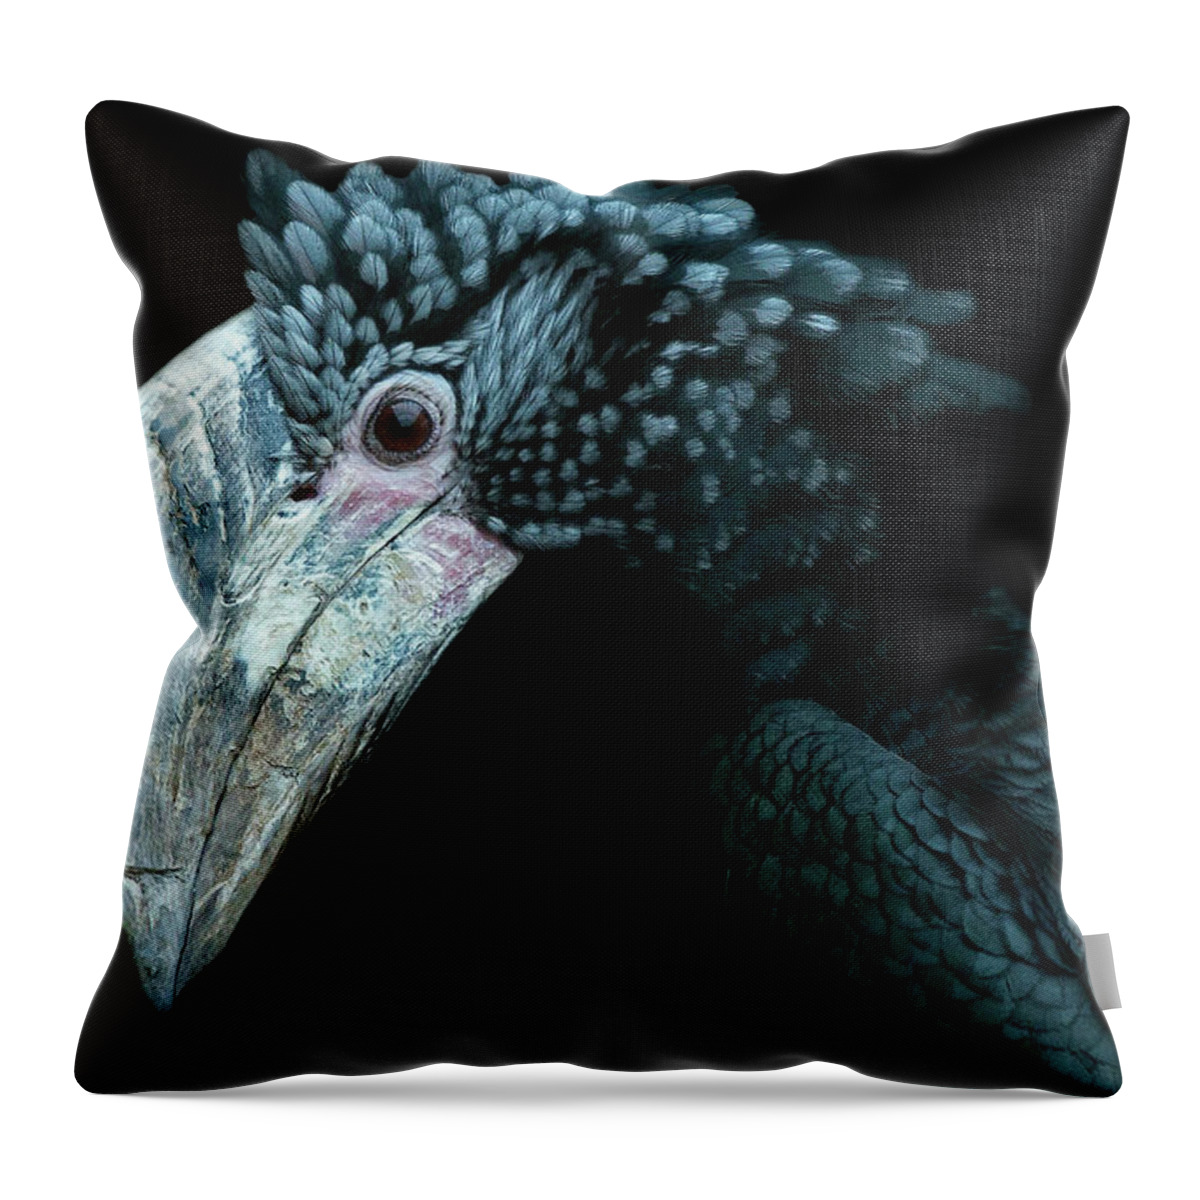 Toronto Throw Pillow featuring the photograph Silver Cheeked Hornbill by Ryan Courson Photography